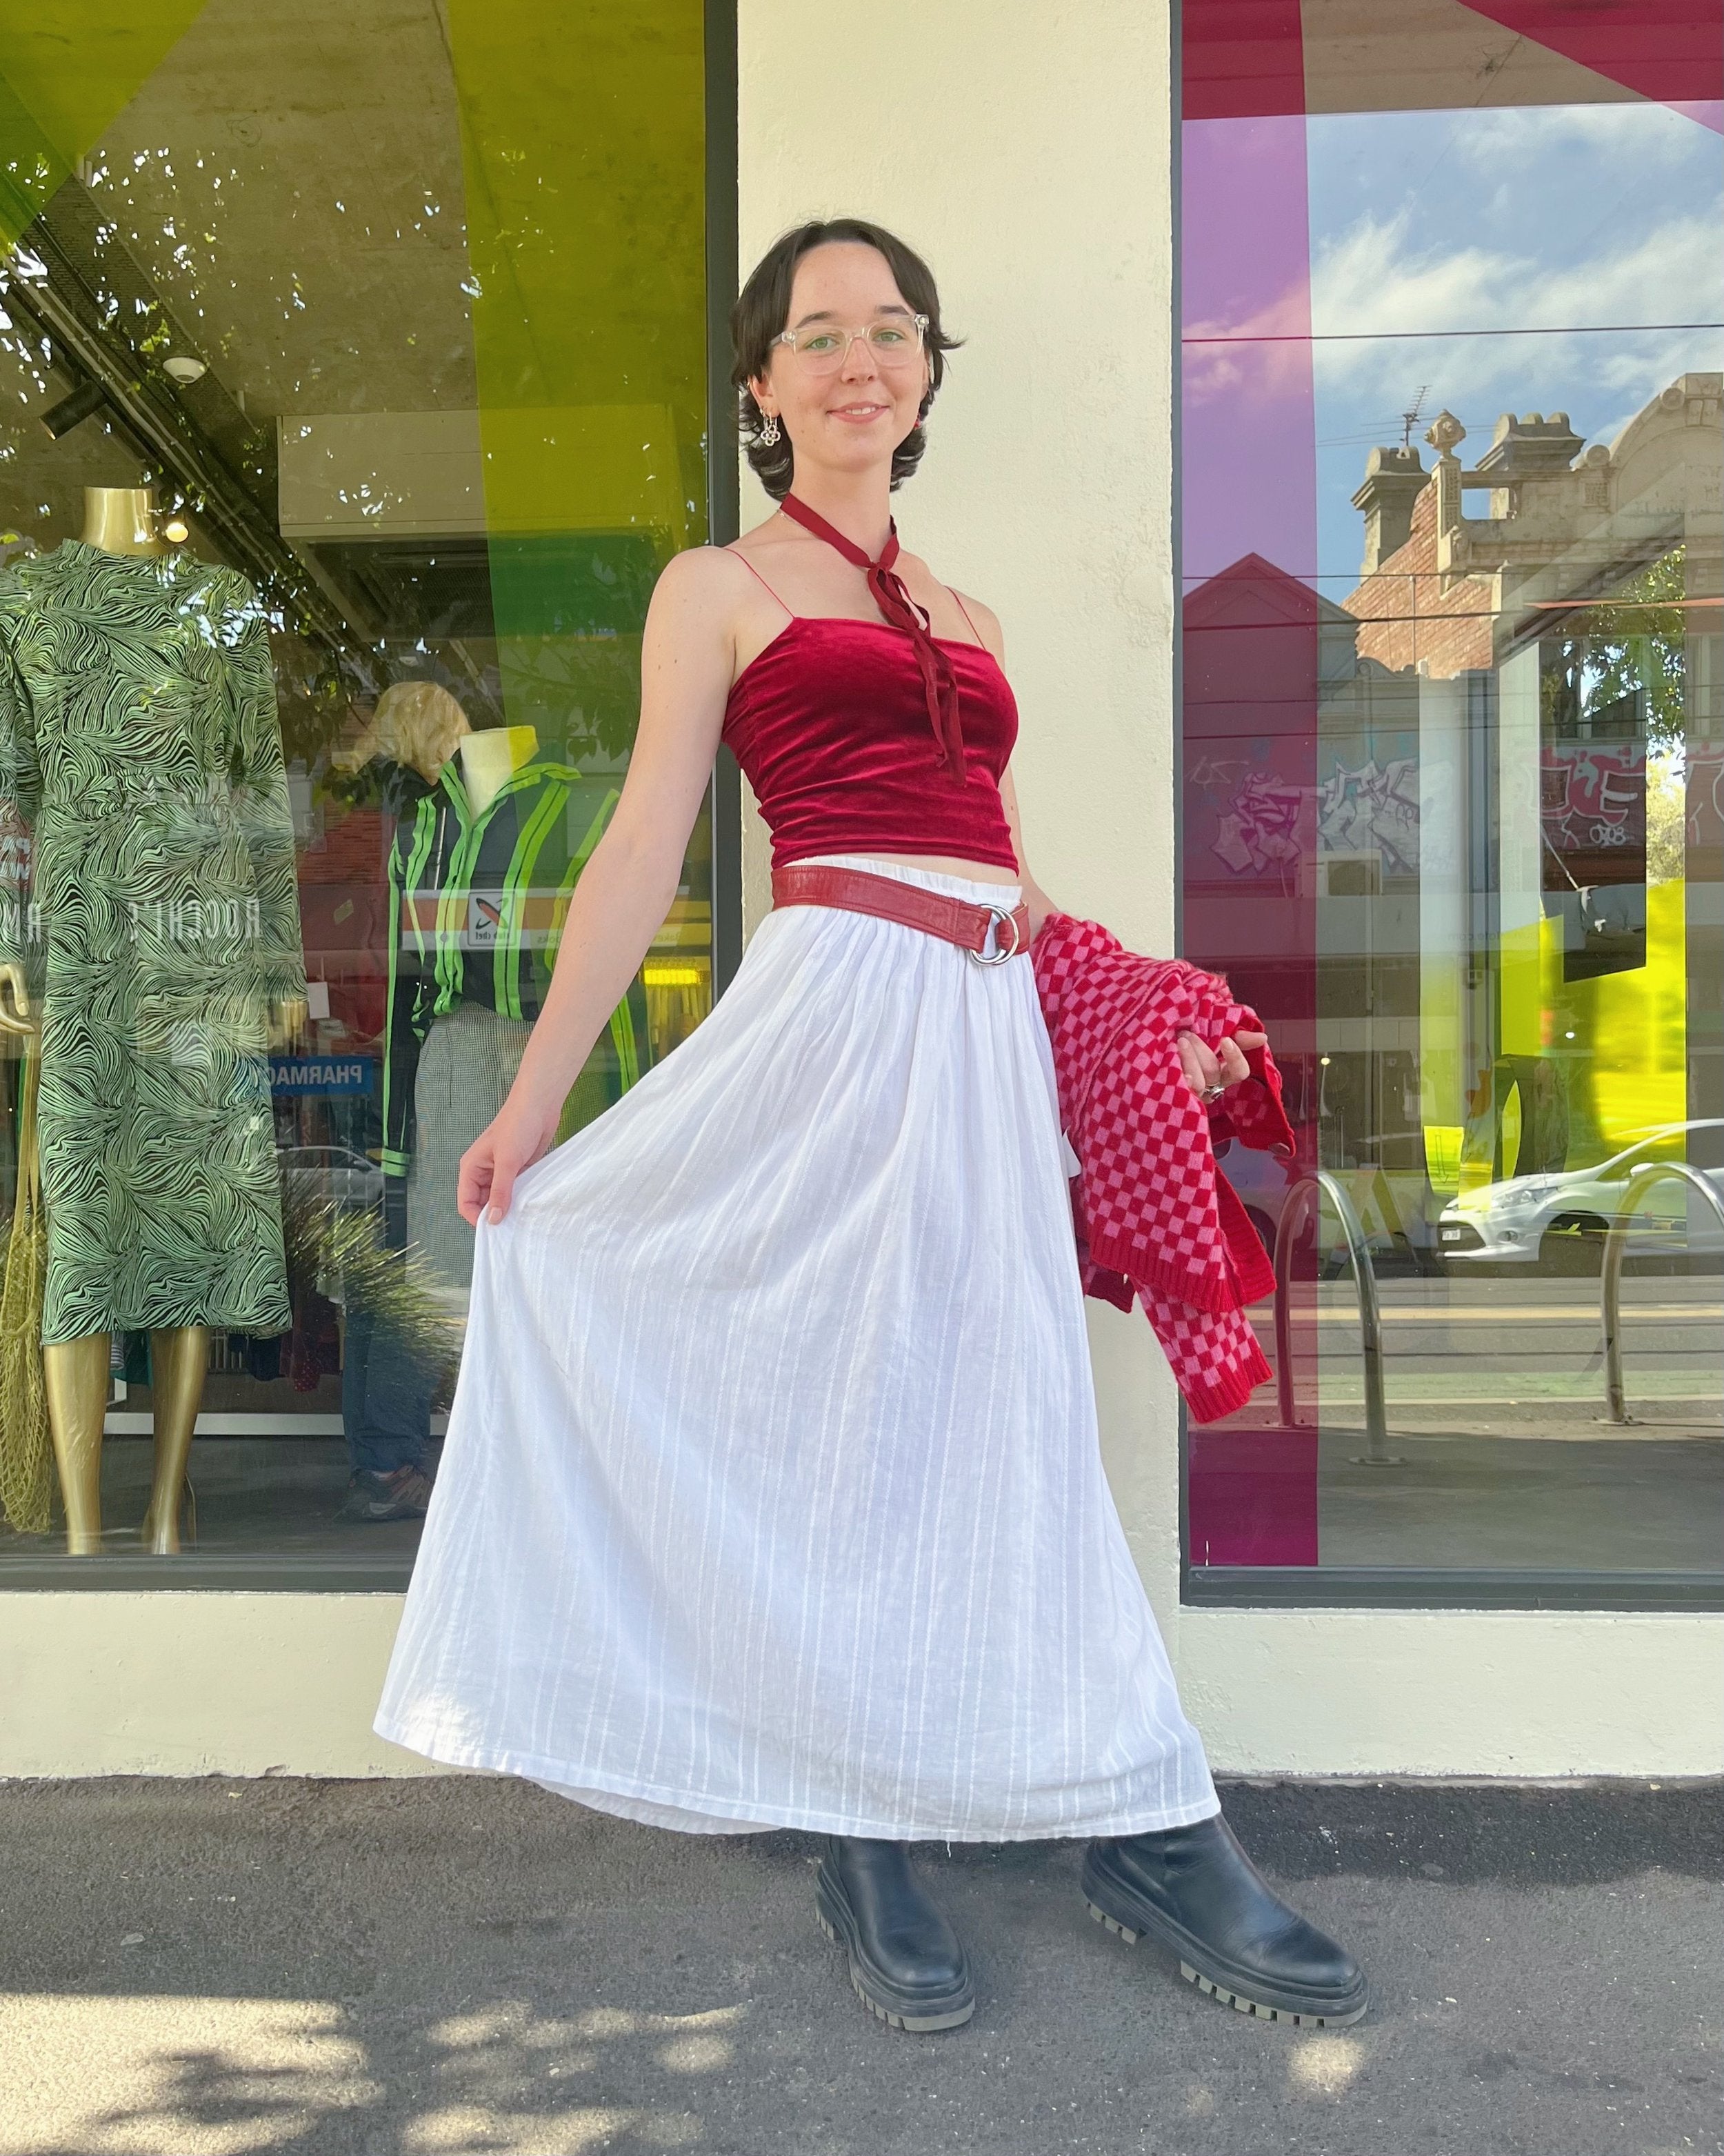 Chessie standing in front of Mutual Muse Northcote, posing side-on and holding out her skirt with one hand. She is wearing a dark-red velvet tank with a matching red ribbon around her neck. She also wears a red belt, a white skirt, and black boots. In her left hand, she holds a red-and-pink checkered cardigan. Behind her is the Mutual Muse Northcote storefront, with floor-to-ceiling windows and white walls.